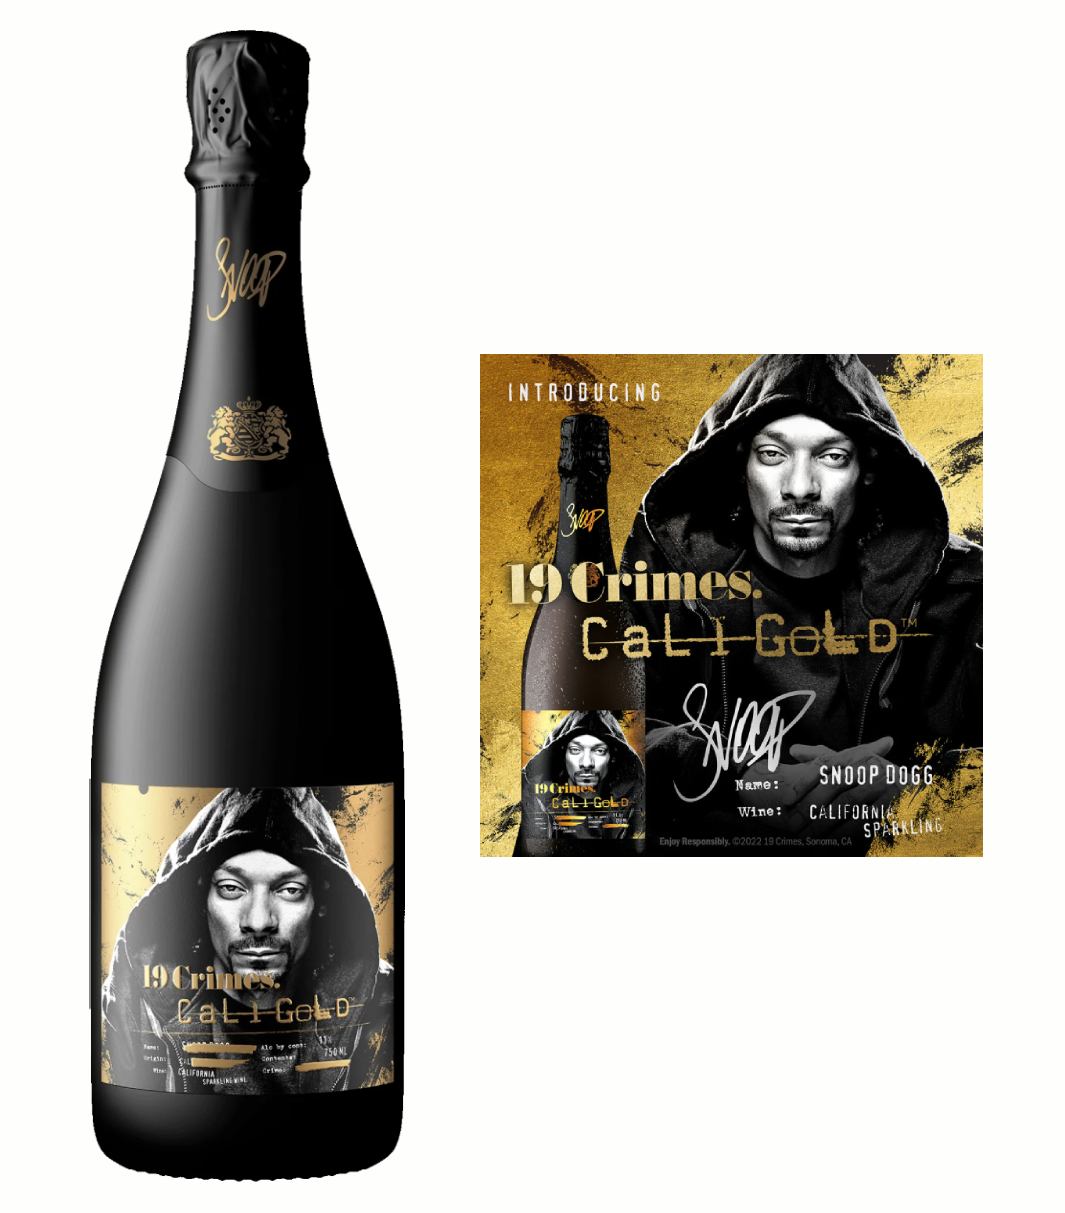 19 Famous Champagne Brands and Their Logos 